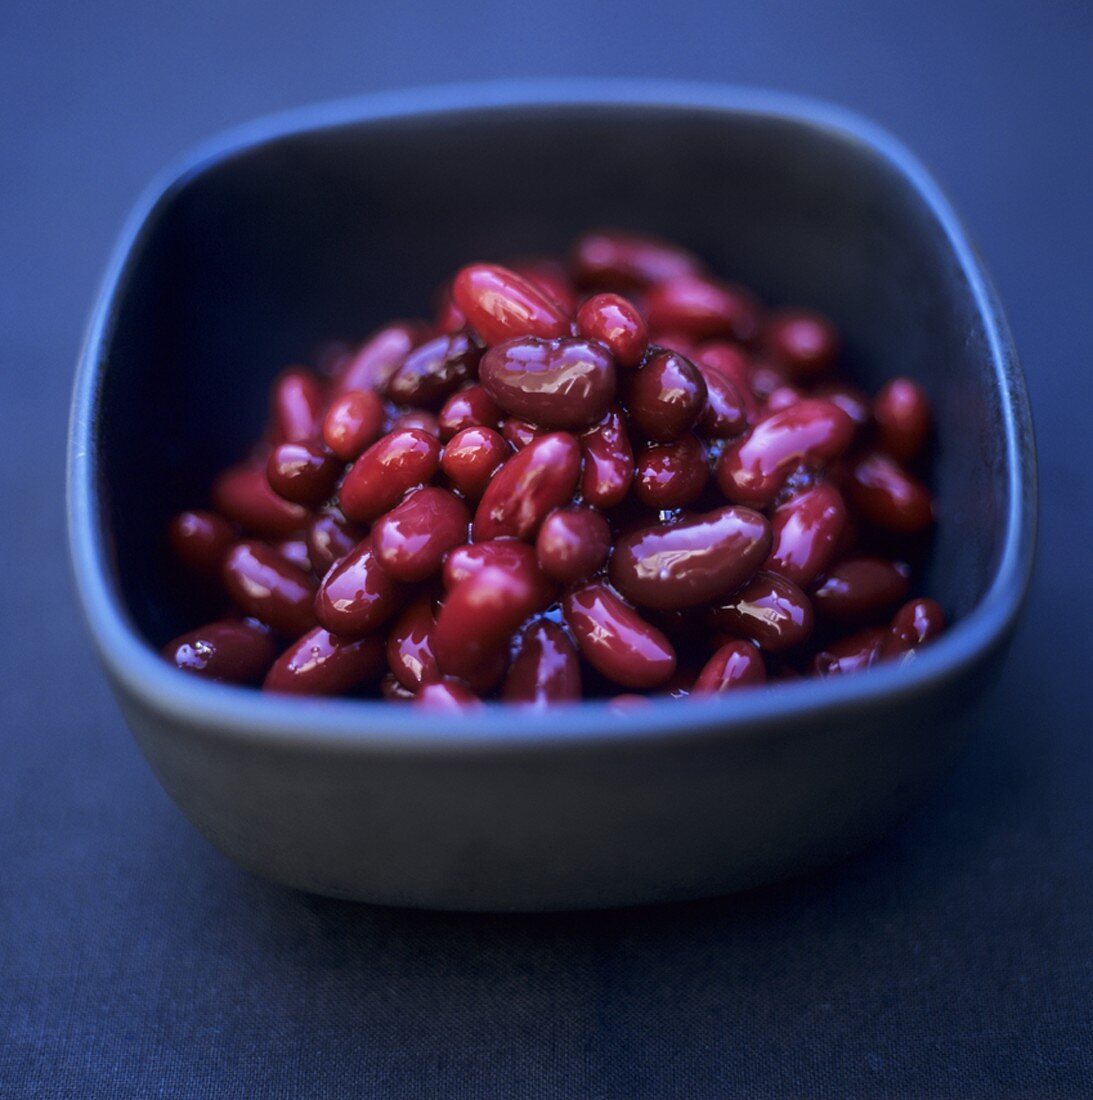 Kidney beans in a bowl